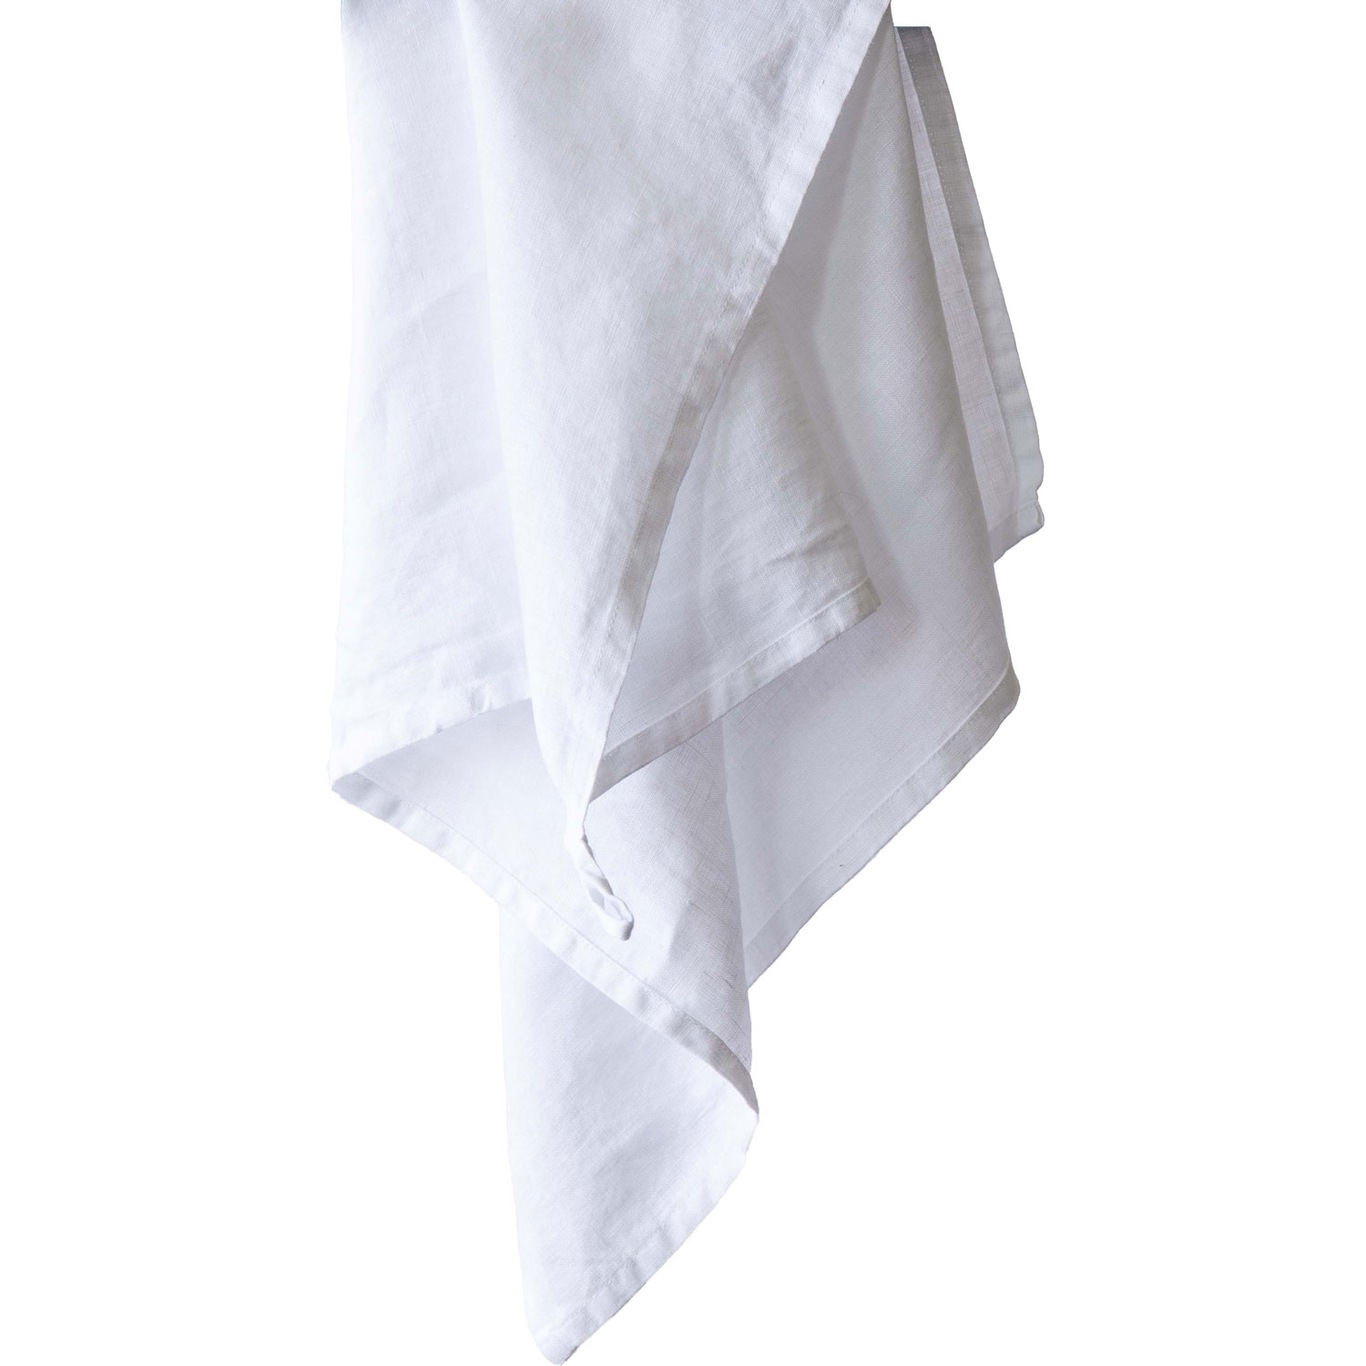 https://royaldesign.com/image/2/tell-me-more-kitchen-towel-linen-bleached-white-0?w=800&quality=80